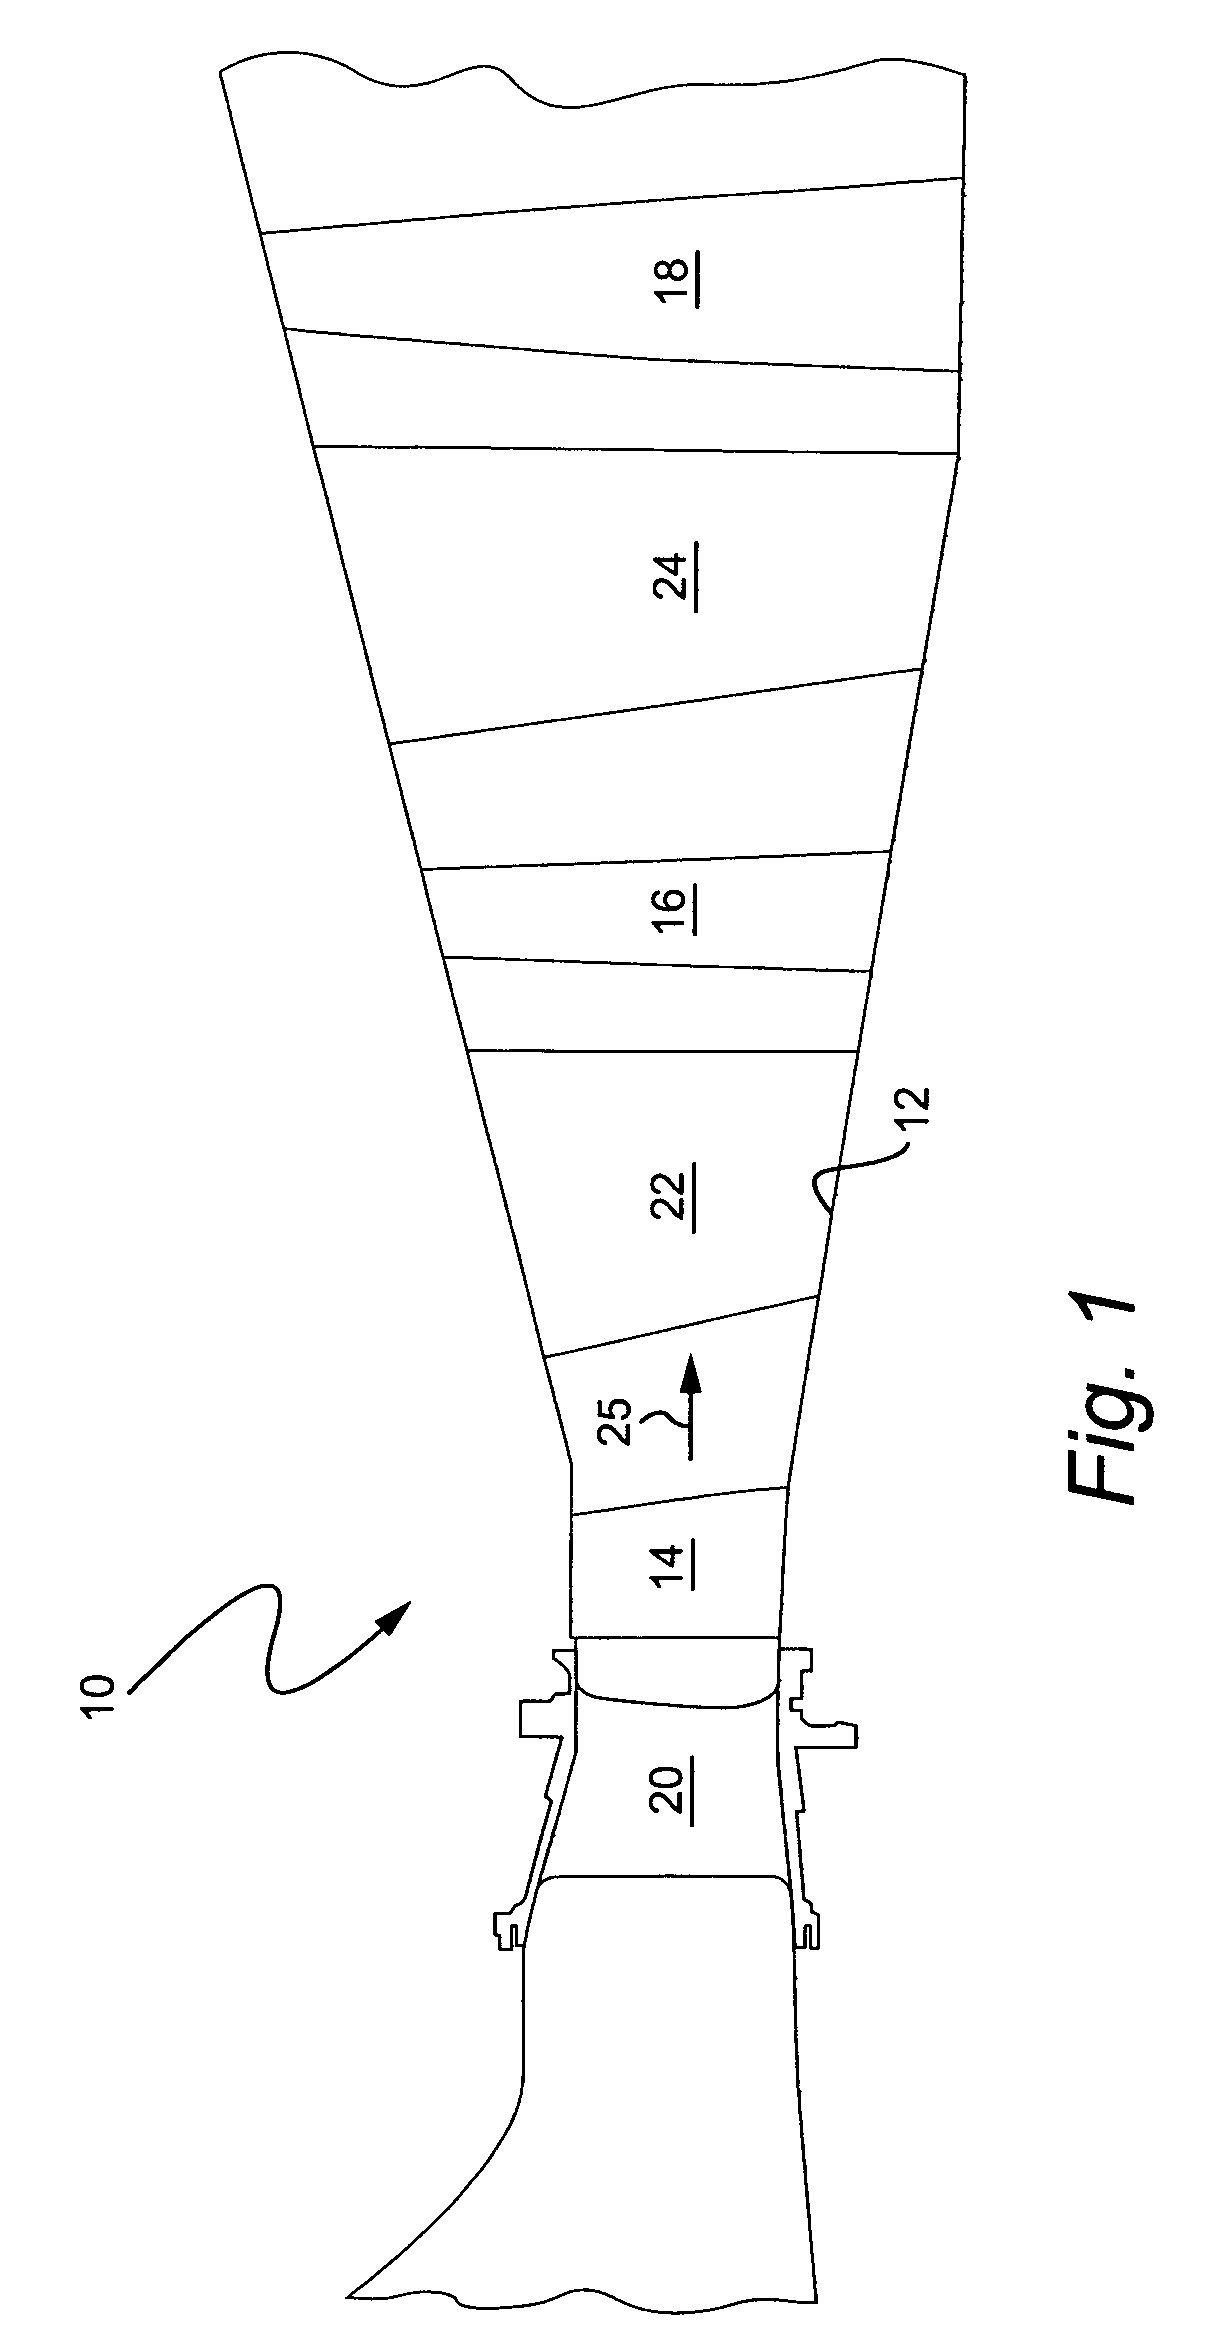 Airfoil shape and sidewall flowpath surfaces for a turbine nozzle